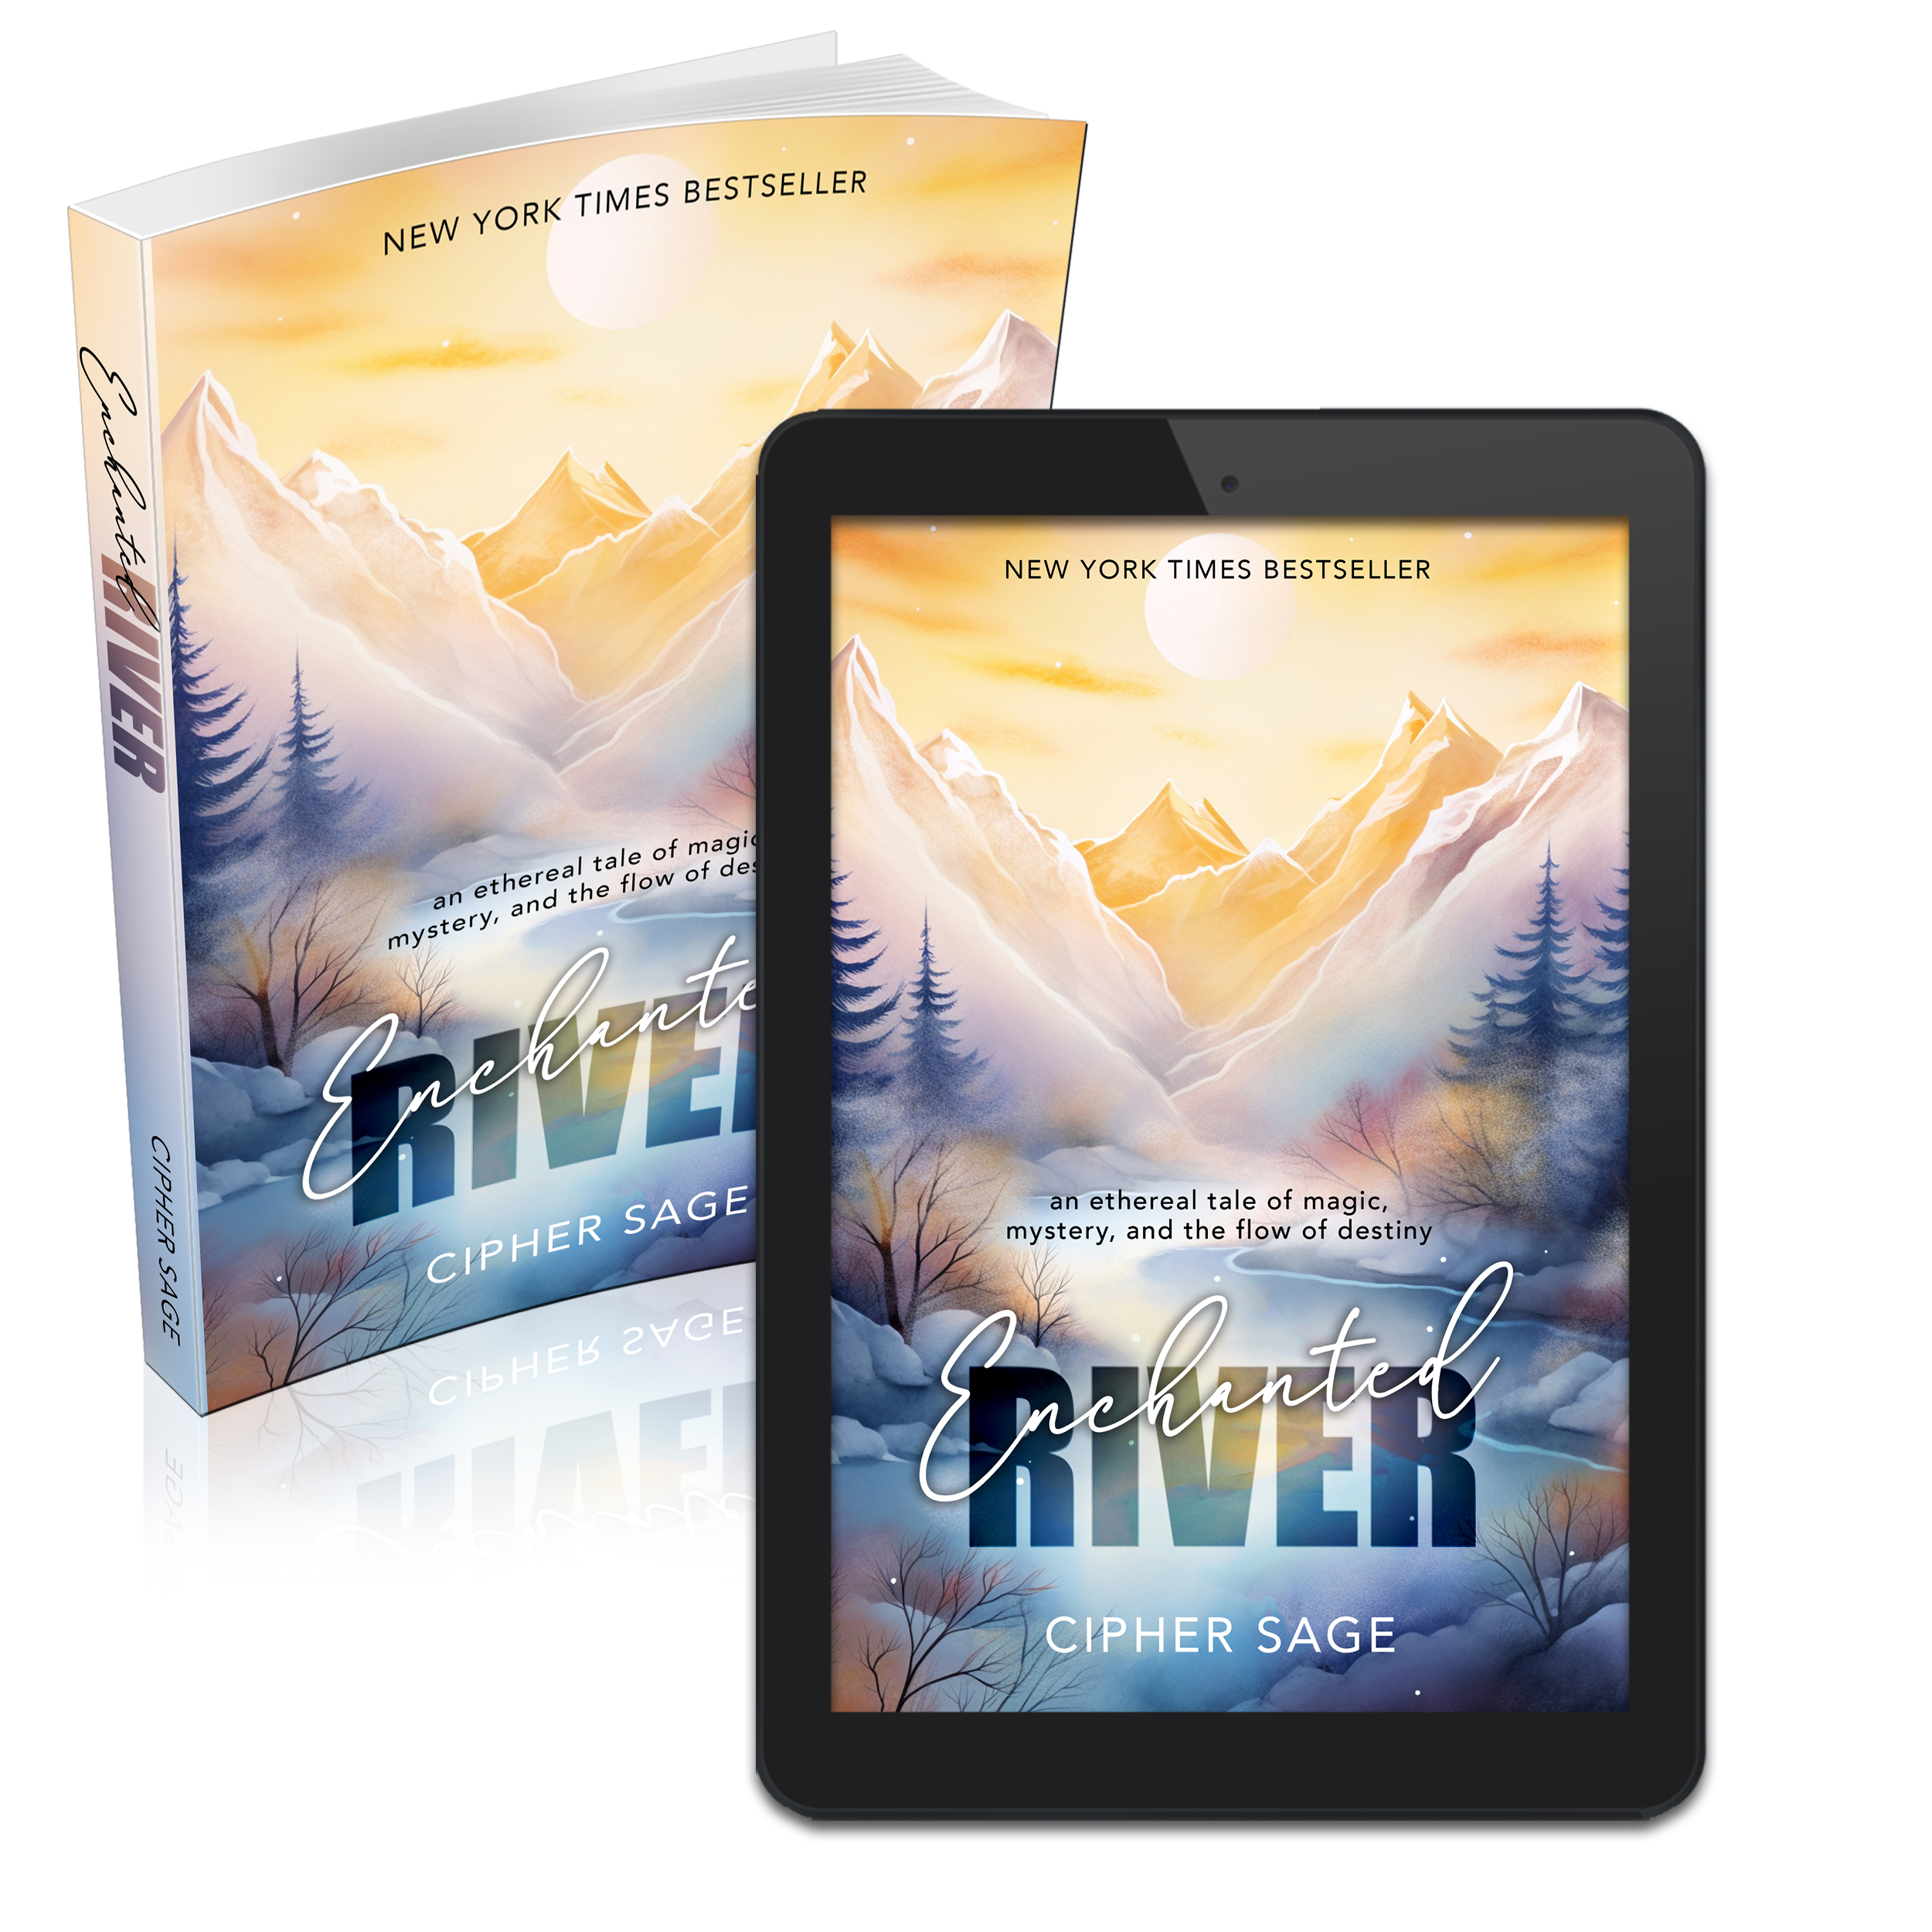 Enchanted River premade cover